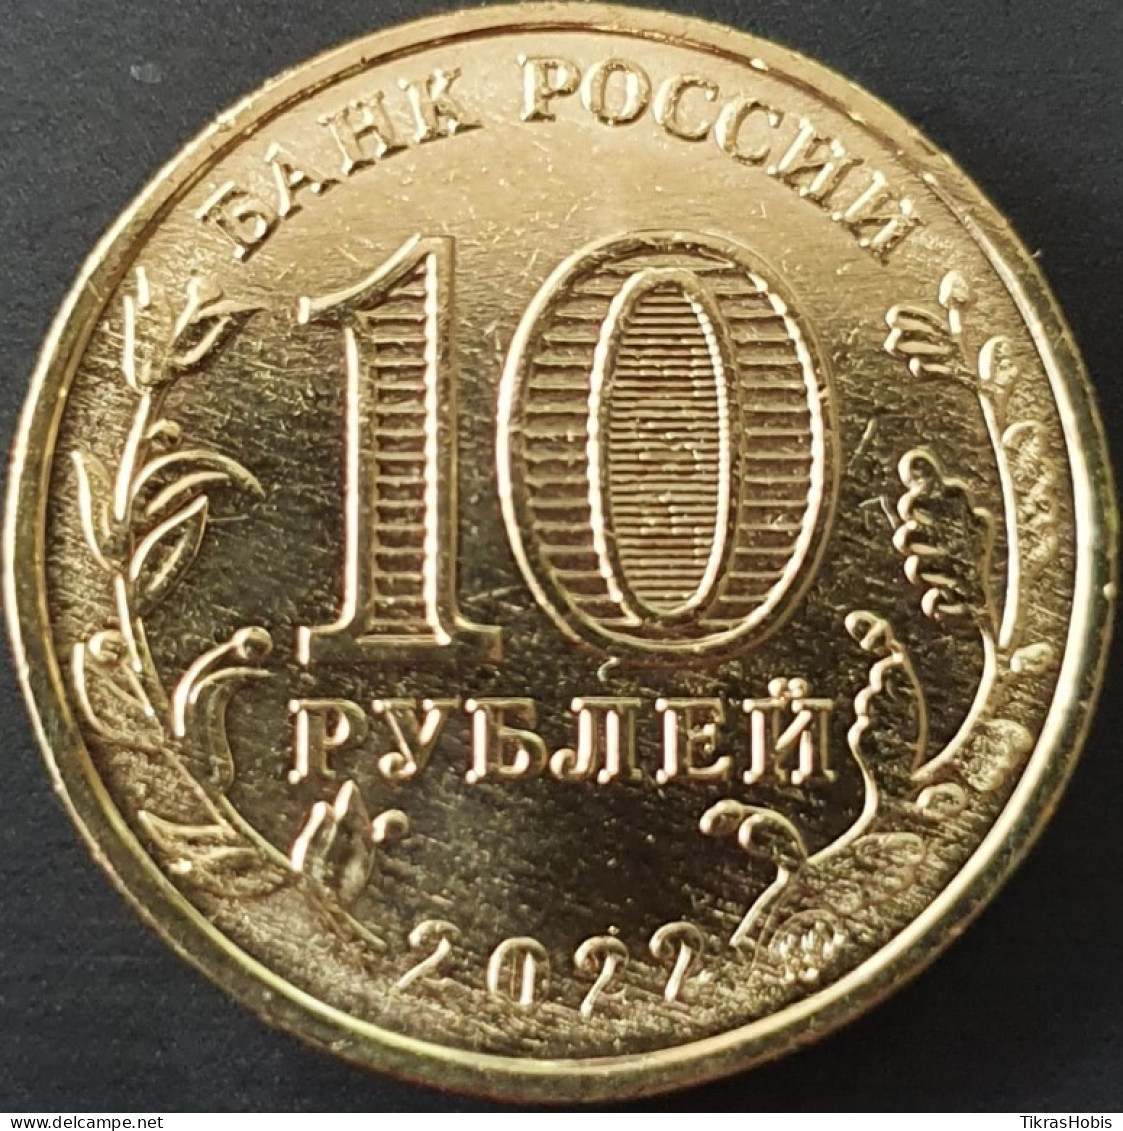 Russia 10 Rubles, 2022 Mining Worker UC1037 - Russia